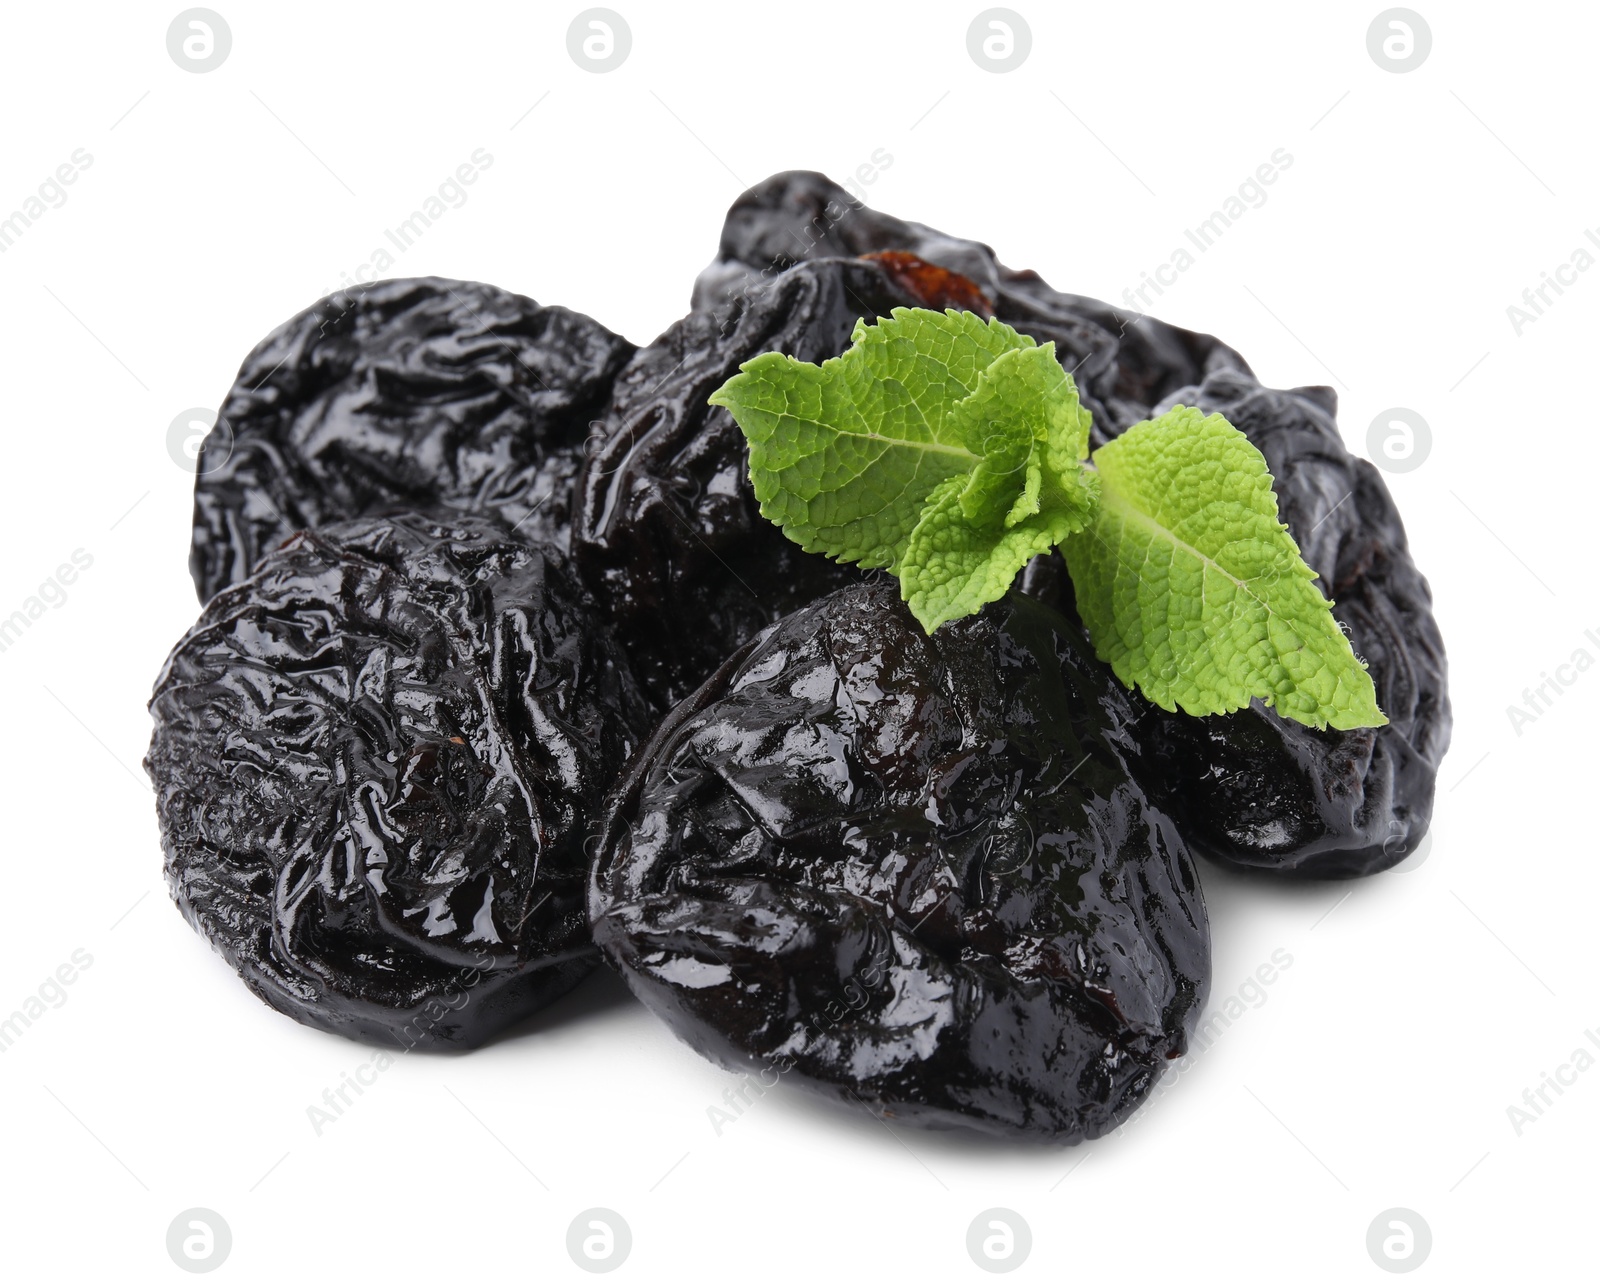 Photo of Tasty dried plums (prunes) and mint leaves on white background